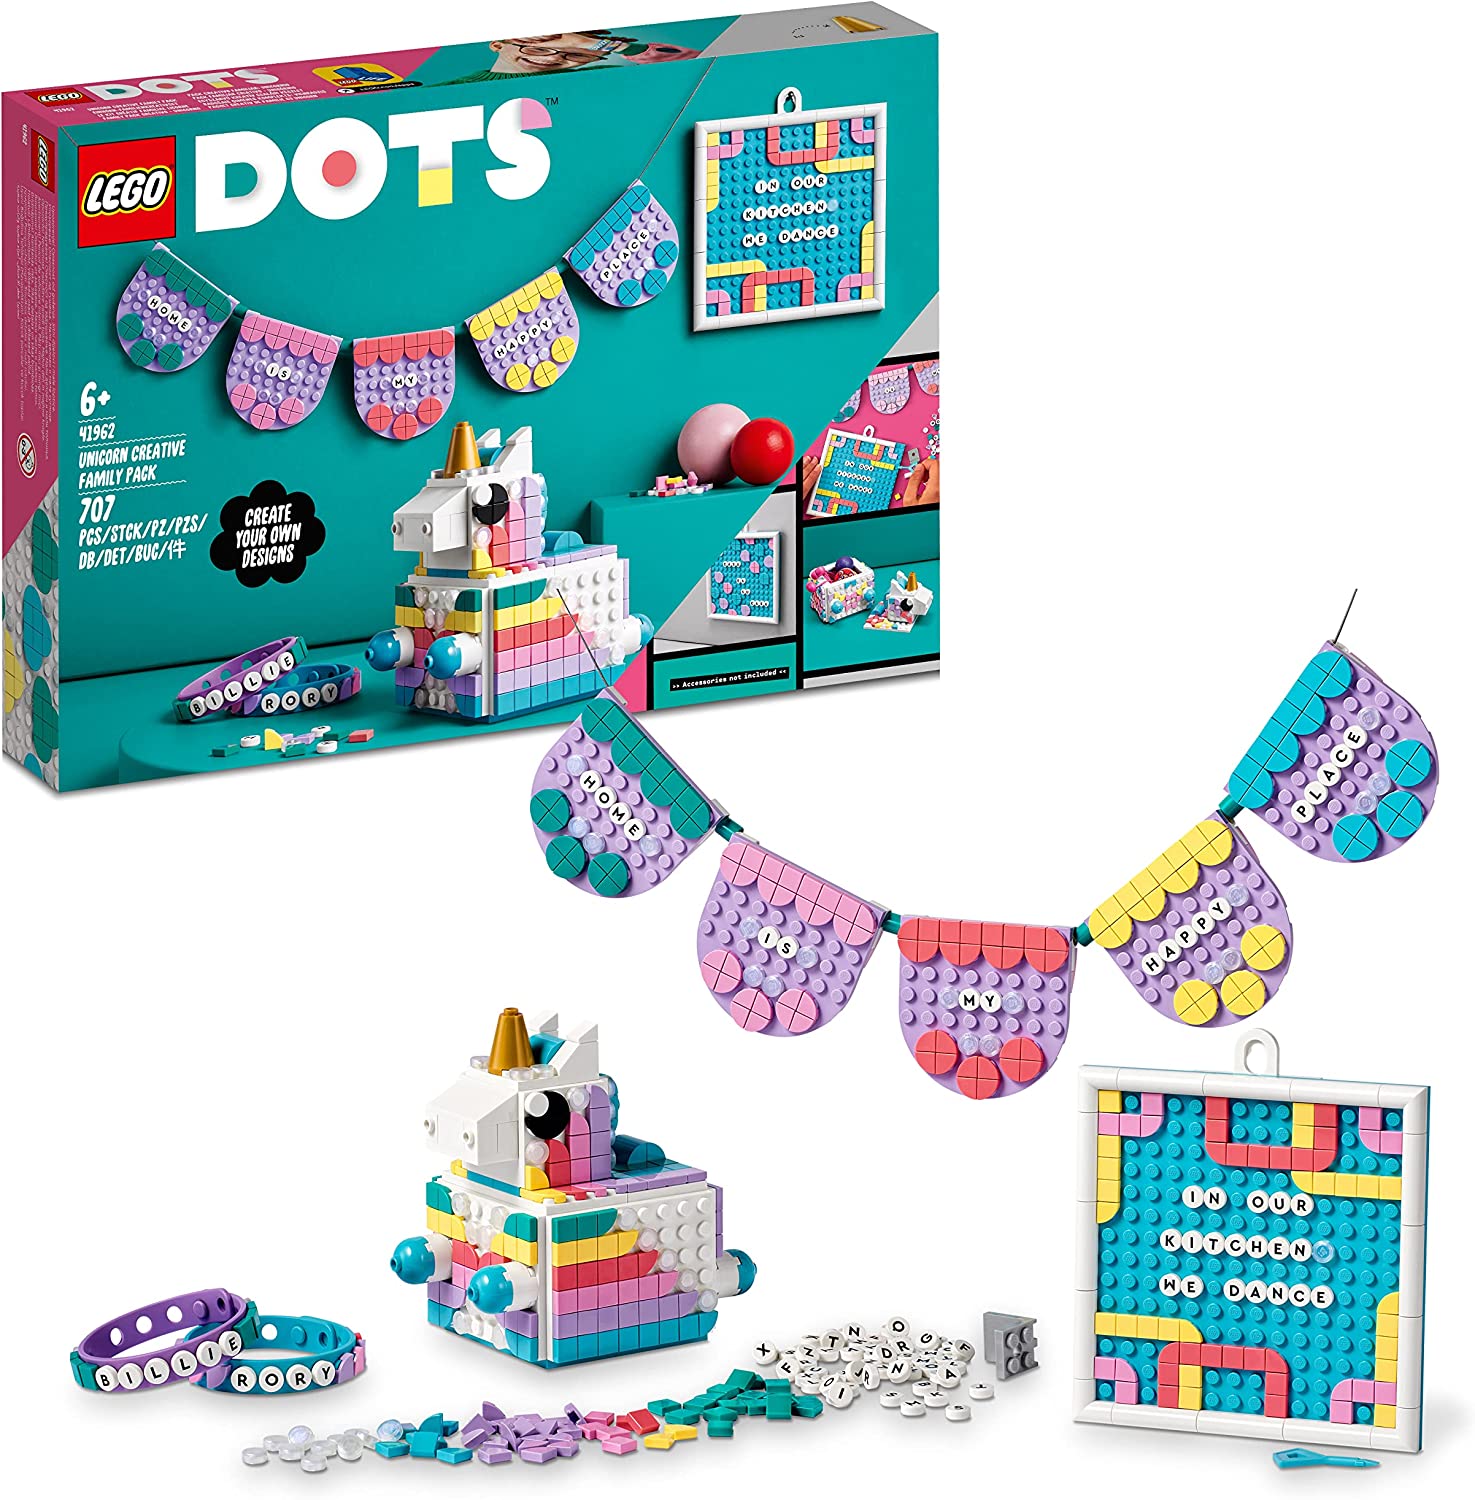 LEGO 41962 DOTS Unicorn Family Creative Set, Toy Craft Set with Jewellery Box, 2 x Bracelets, Message Board and Party Decoration for Girls and Boys